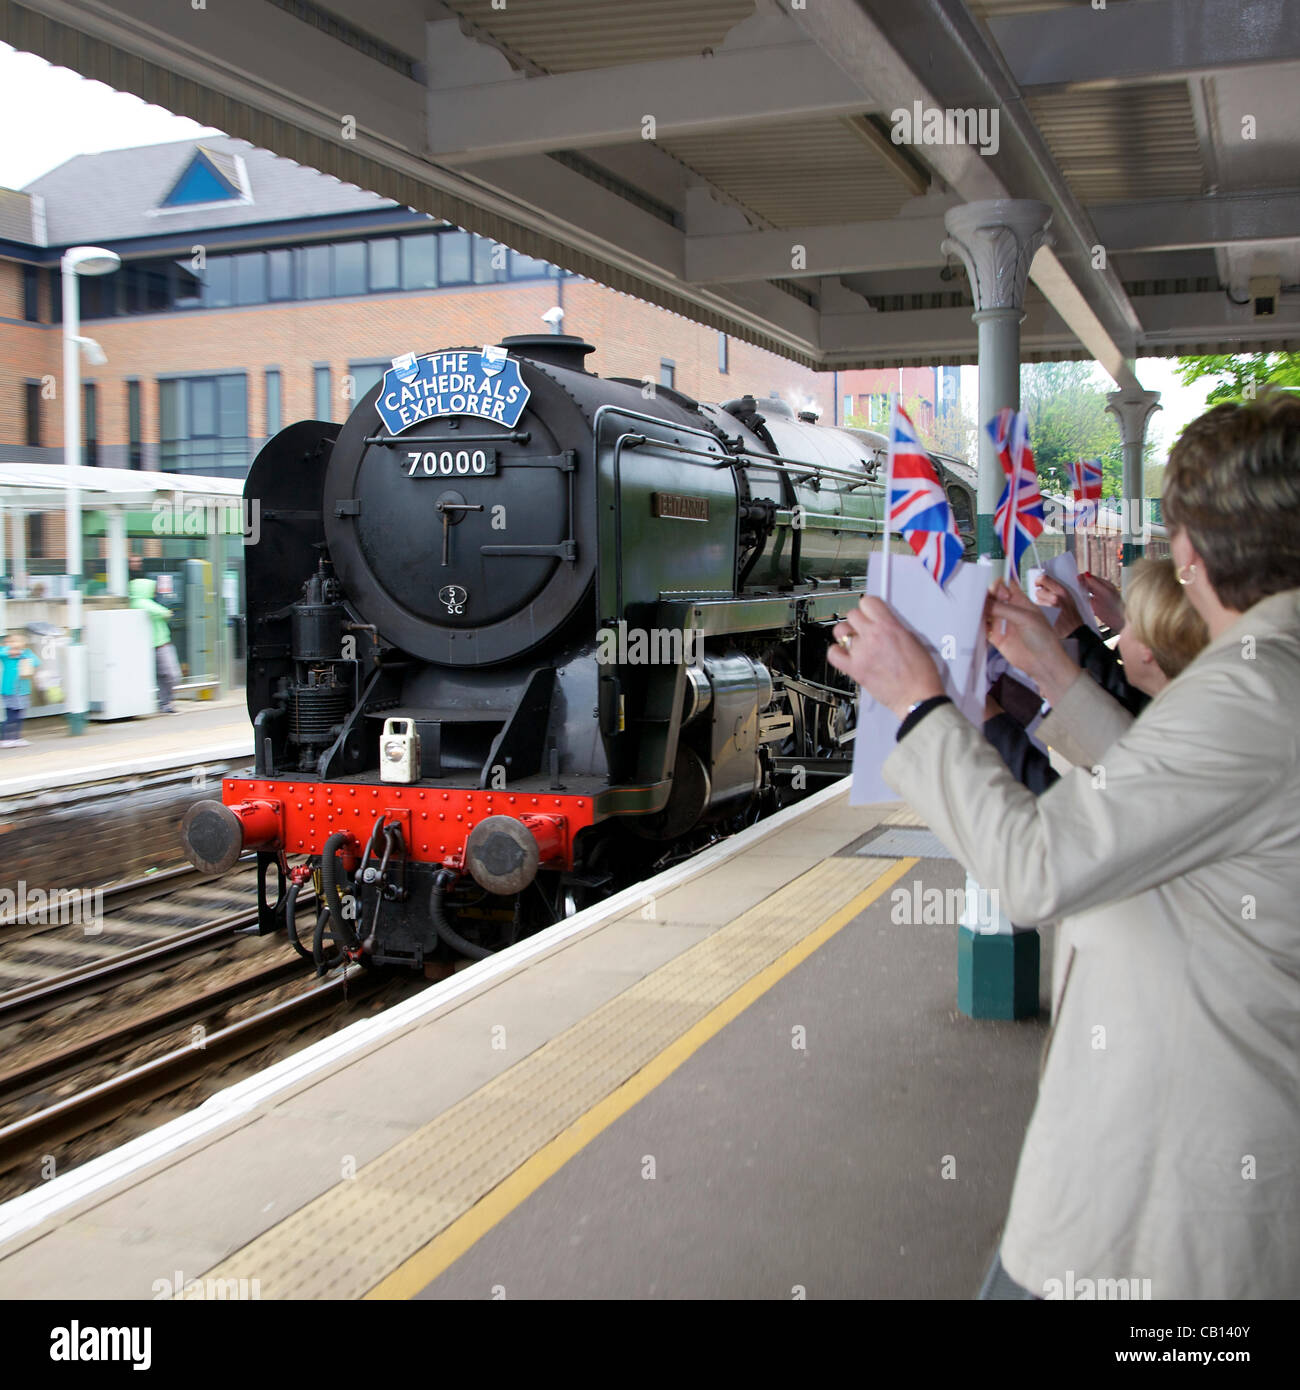 Welcomed by excited flag waving crowds as it passed Reigate Station in Surrey at 0903hrs Friday 18th May 2012 is 'Cathedrals Explorer' Britannia Class 7MT 4-6-2 no 70000 Britannia steam locomotive en route to Durham on an 8 day tour. With 67026 DB Schenker Class Diesel 'Diamond Jubilee' at the rear Stock Photo